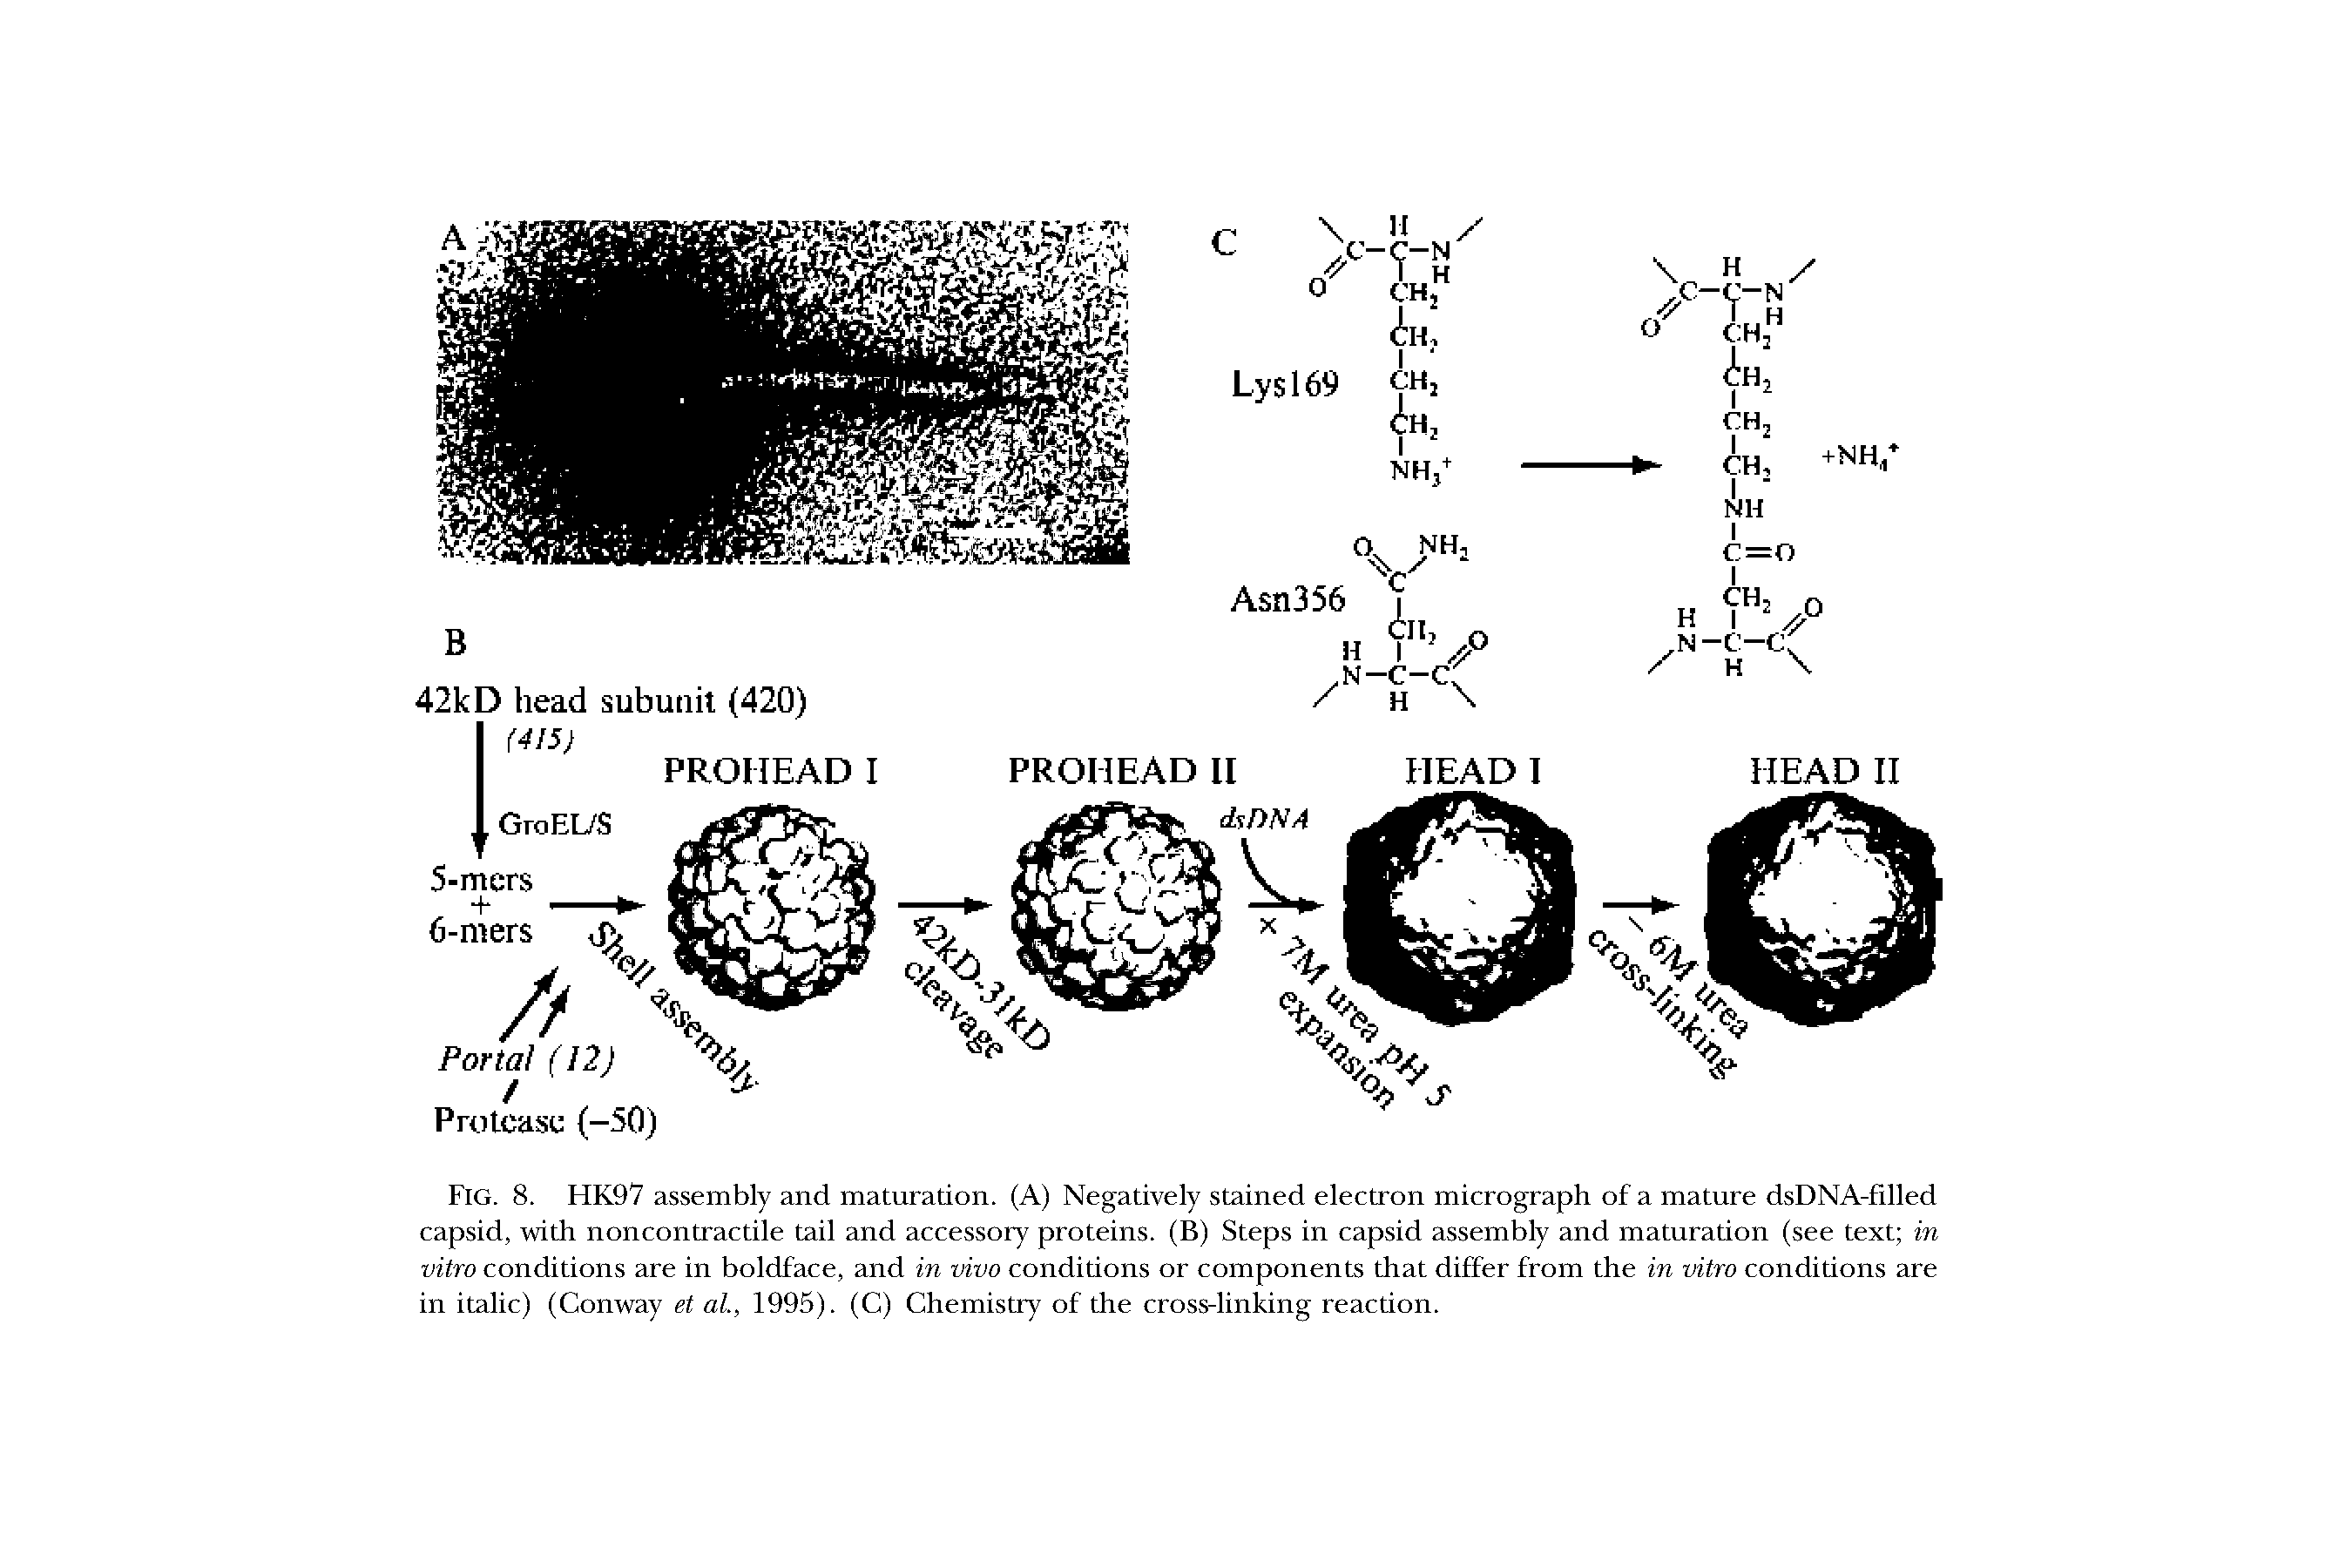 Fig. 8. HK97 assembly and maturation. (A) Negatively stained electron micrograph of a mature dsDNA-filled capsid, with noncontractile tail and accessory proteins. (B) Steps in capsid assembly and maturation (see text in vitro conditions are in boldface, and in vivo conditions or components that differ from the in vitro conditions are in italic) (Conway et al, 1995). (C) Chemistry of the cross-linking reaction.